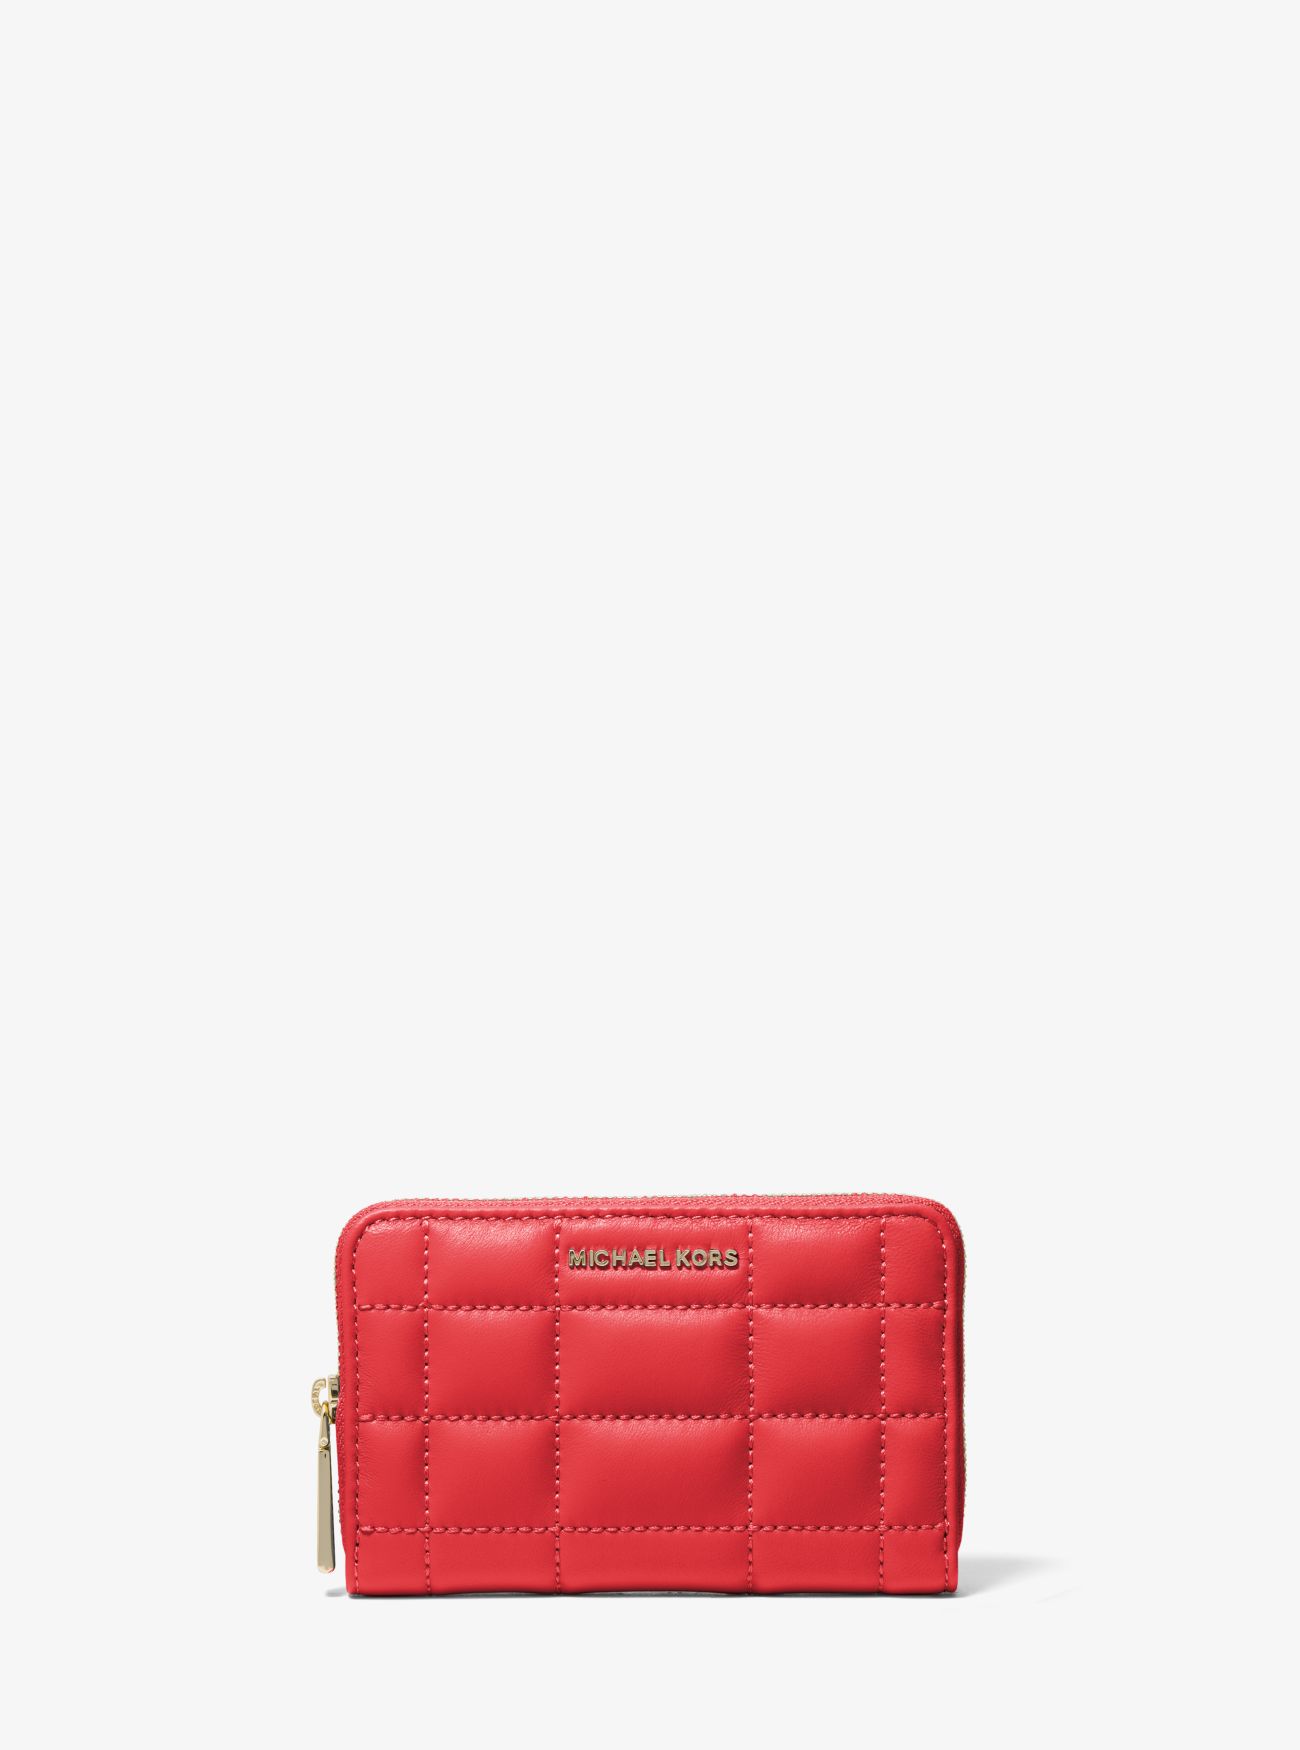 MK Small Quilted Leather Wallet - Red - Michael Kors